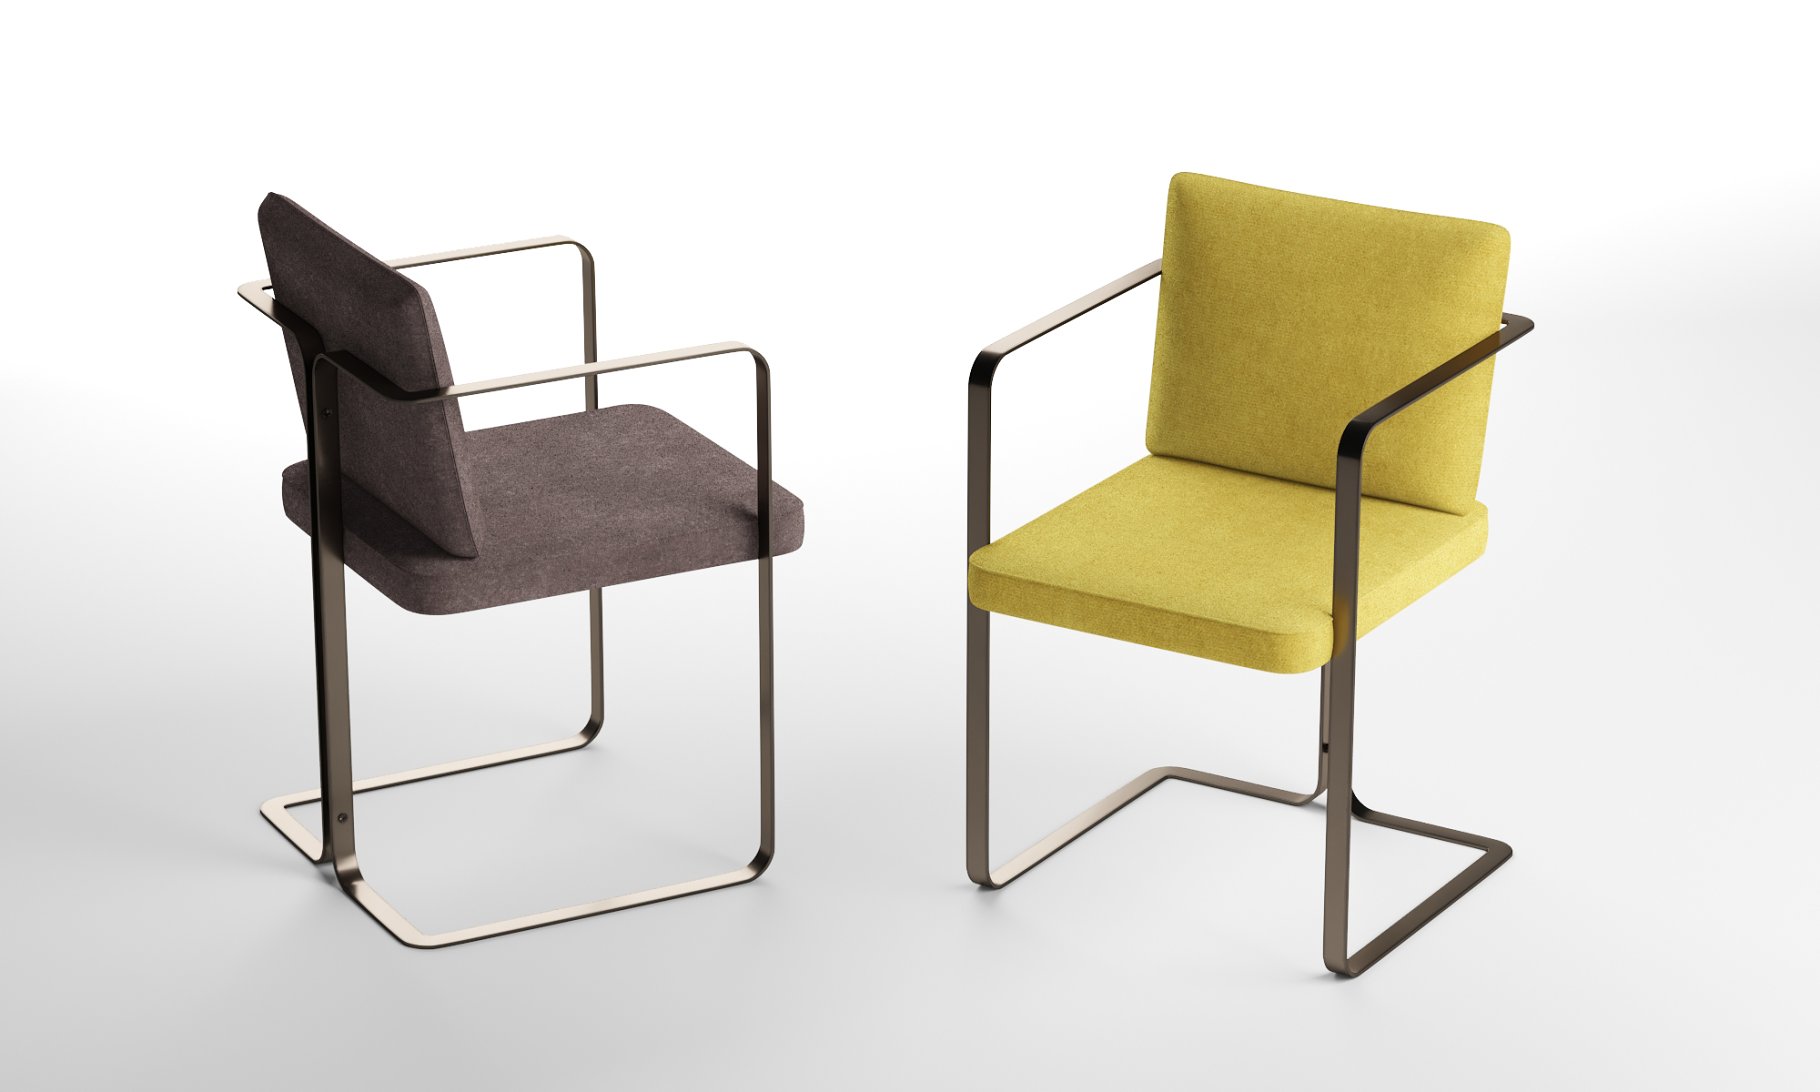 Rendering an irresistible chair 3d model in two colors